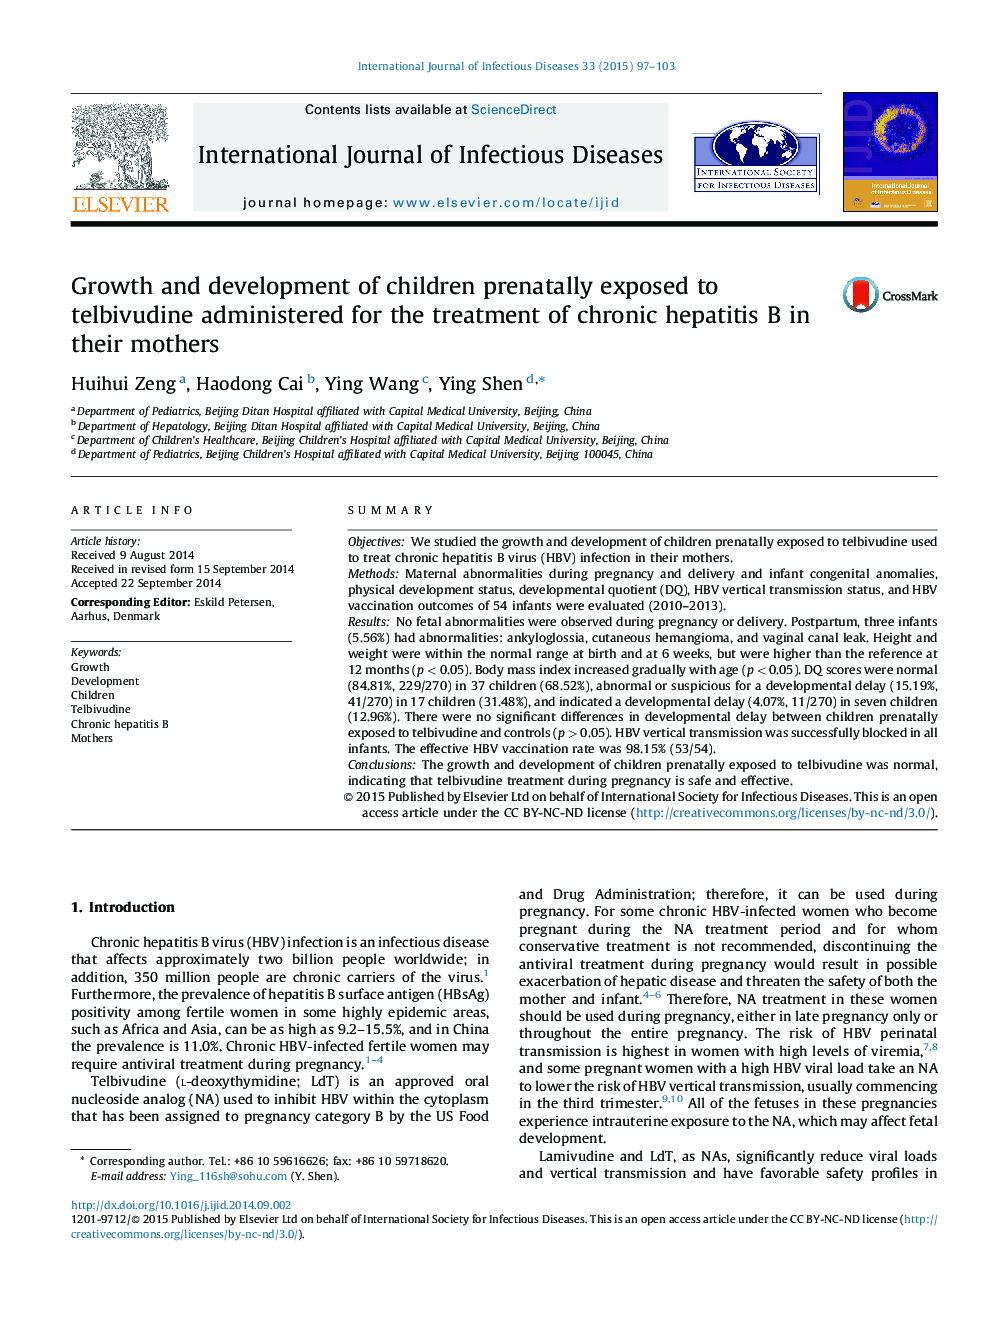 Growth and development of children prenatally exposed to telbivudine administered for the treatment of chronic hepatitis B in their mothers